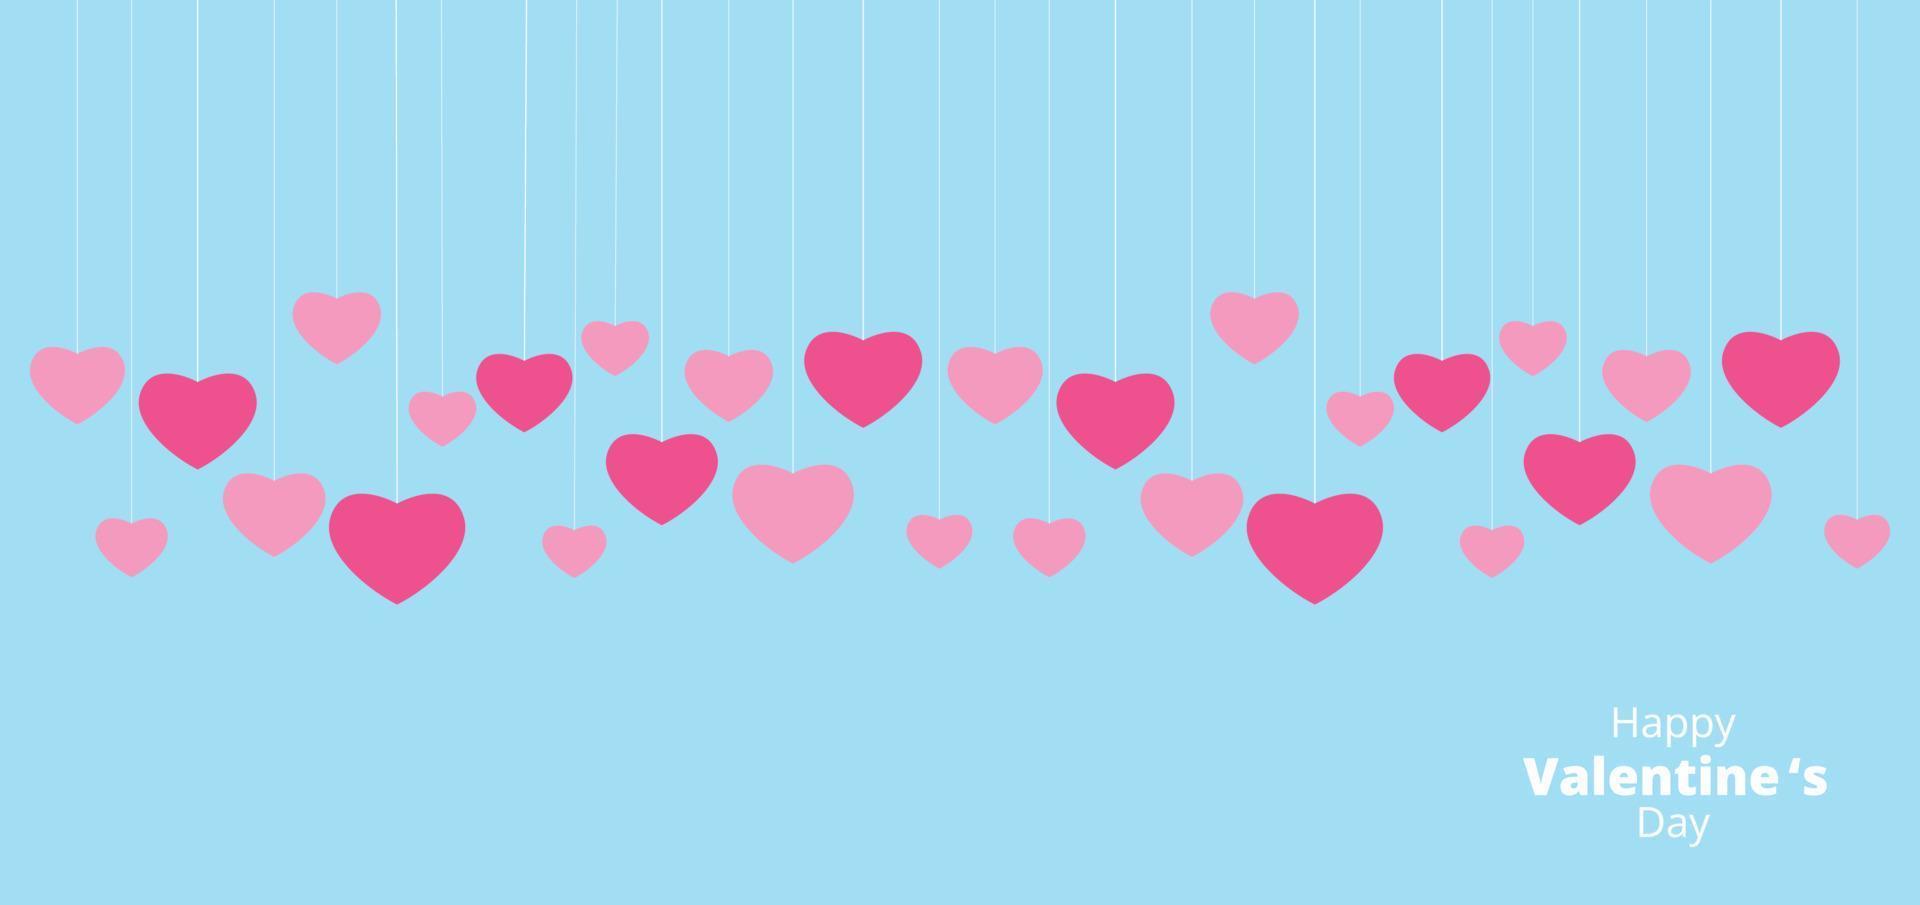 Valentine background with pink hearts vector